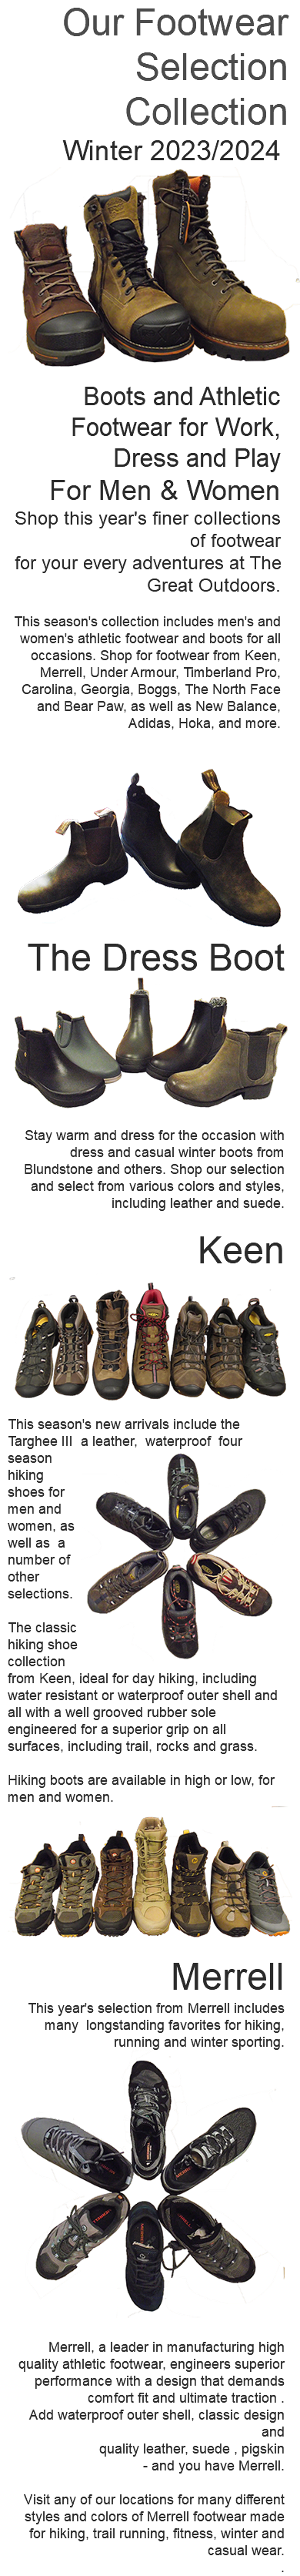 Our Footwear Selection Collection Winter 2023/2024 ﷯ Boots and Athletic Footwear for Work, Dress and Play For Men & Women Shop this year's finer collections of footwear for your every adventures at The Great Outdoors. This season's collection includes men's and women's athletic footwear and boots for all occasions. Shop for footwear from Keen, Merrell, Under Armour, Timberland Pro, Carolina, Georgia, Boggs, The North Face and Bear Paw, as well as New Balance, Adidas, Hoka, and more. ﷯﷯The Dress Boot Stay warm and dress for the occasion with dress and casual winter boots from Blundstone and others. Shop our selection and select from various colors and styles, including leather and suede. Keen ﷯This season's new arrivals include the Targhee III a leather, ﷯ waterproof four season hiking shoes for men and women, as well as a number of other selections. The classic hiking shoe collection from Keen, ideal for day hiking, including water resistant or waterproof outer shell and all with a well grooved rubber sole engineered for a superior grip on all surfaces, including trail, rocks and grass. Hiking boots are available in high or low, for men and women. ﷯Merrell This year's selection from Merrell includes many longstanding favorites for hiking, running and winter sporting. ﷯ Merrell, a leader in manufacturing high quality athletic footwear, engineers superior performance with a design that demands comfort fit and ultimate traction . Add waterproof outer shell, classic design and quality leather, suede , pigskin - and you have Merrell. Visit any of our locations for many different styles and colors of Merrell footwear made for hiking, trail running, fitness, winter and casual wear. . 